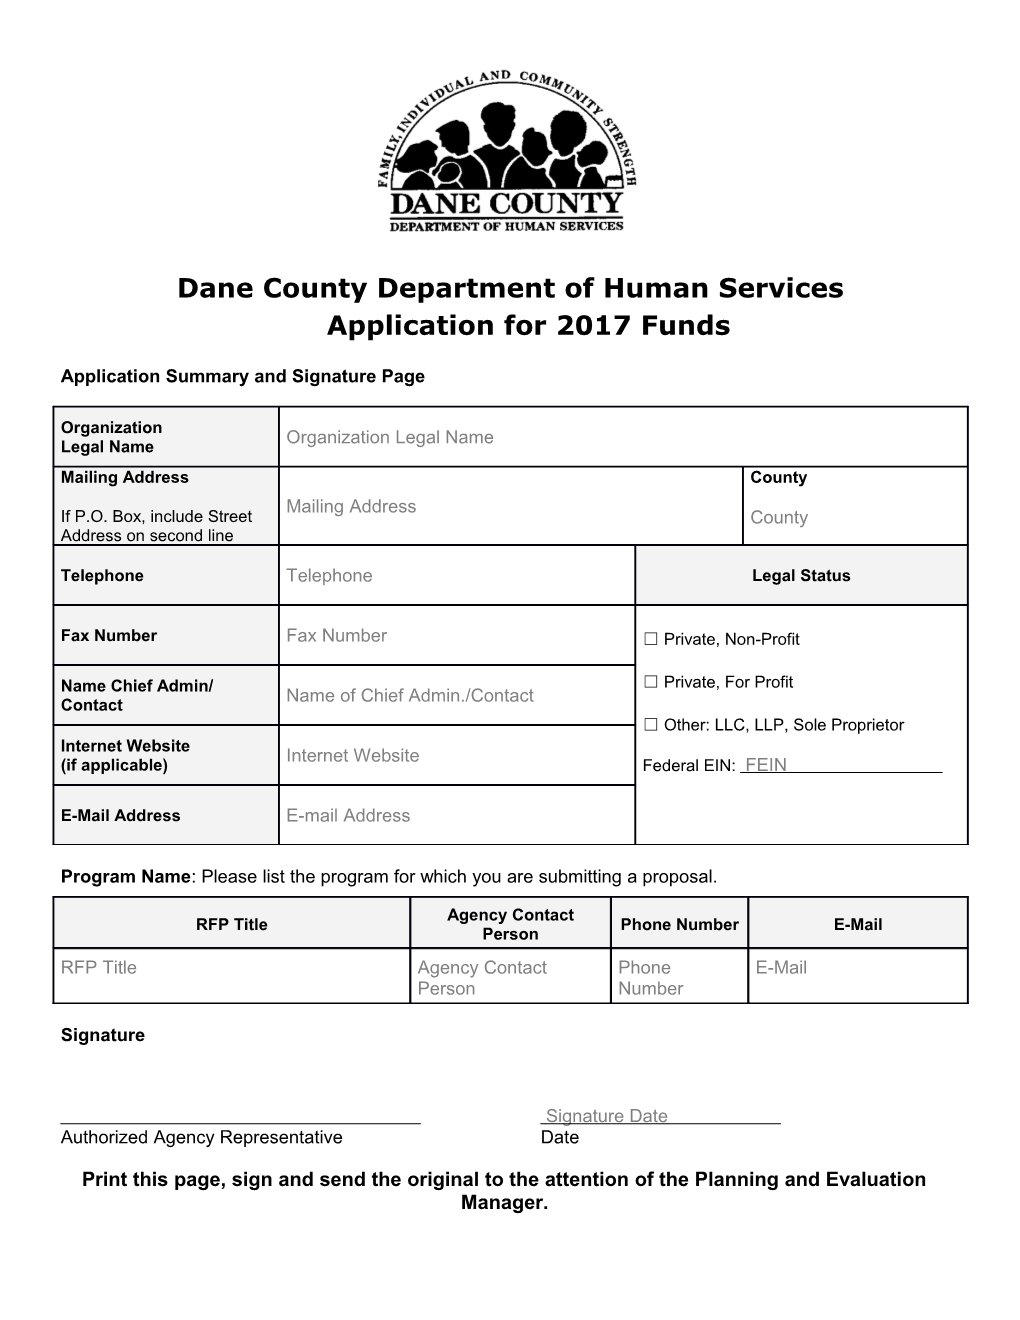 DCDHS Application for 2017 Funds